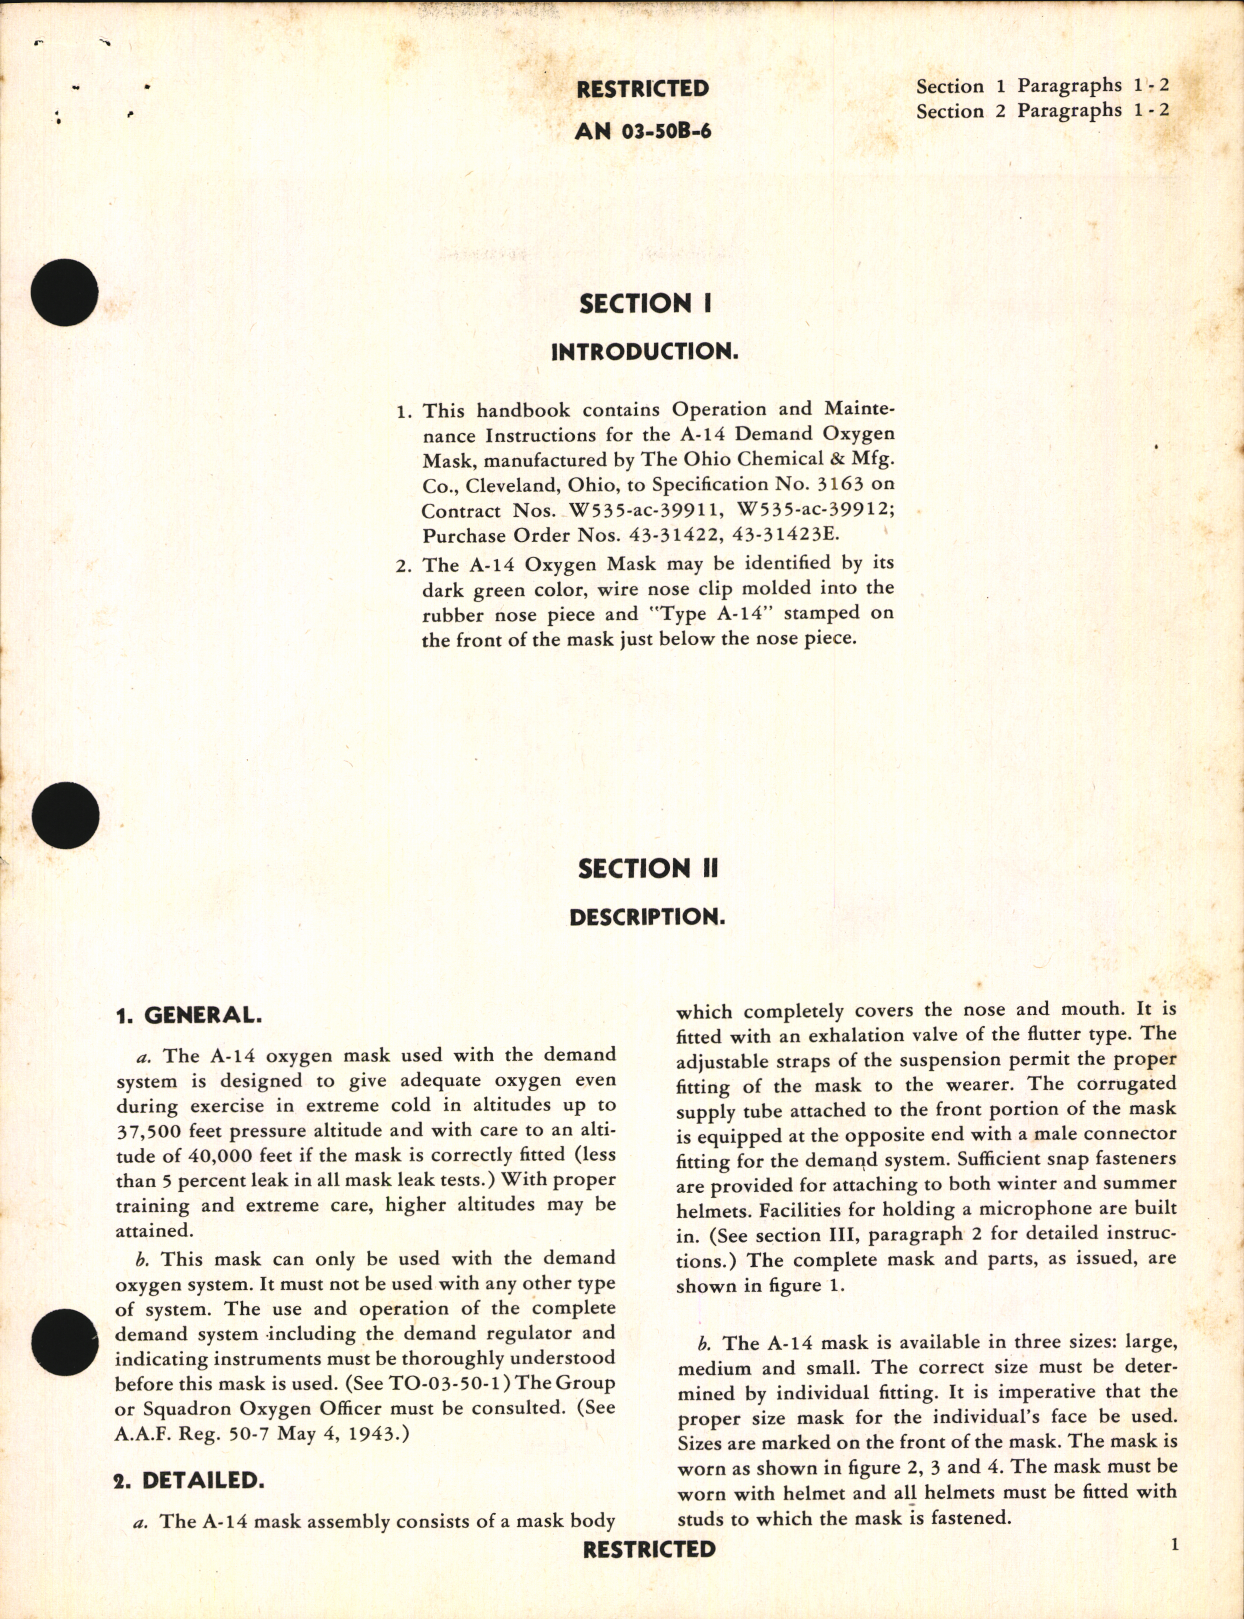 Sample page 7 from AirCorps Library document: Handbook of Instructions with Parts Catalog for Type A-14 Demand Oxygen Mask